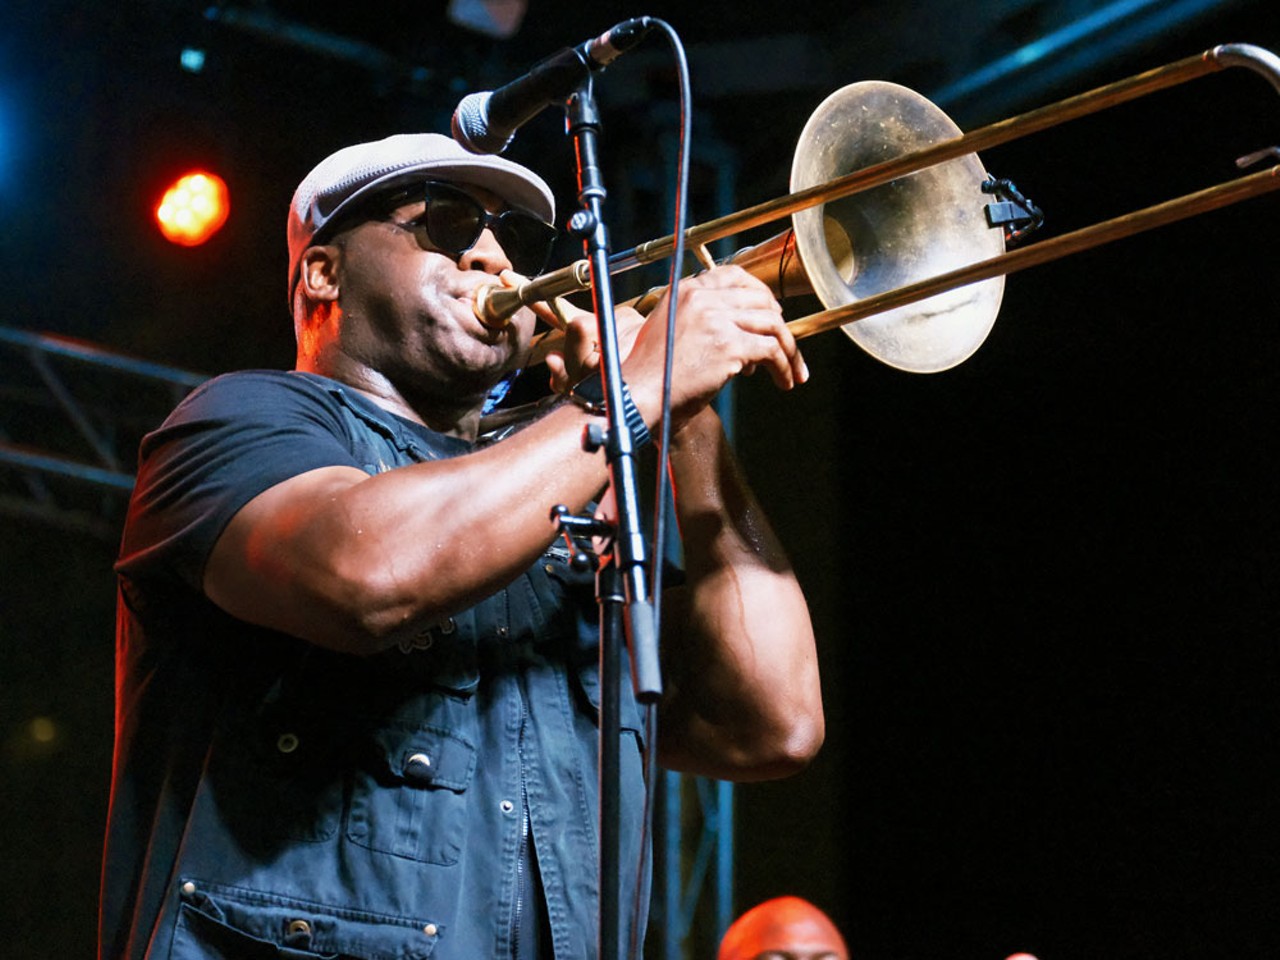 All the music and fun we saw at San Antonio's Jazz'SAlive festival